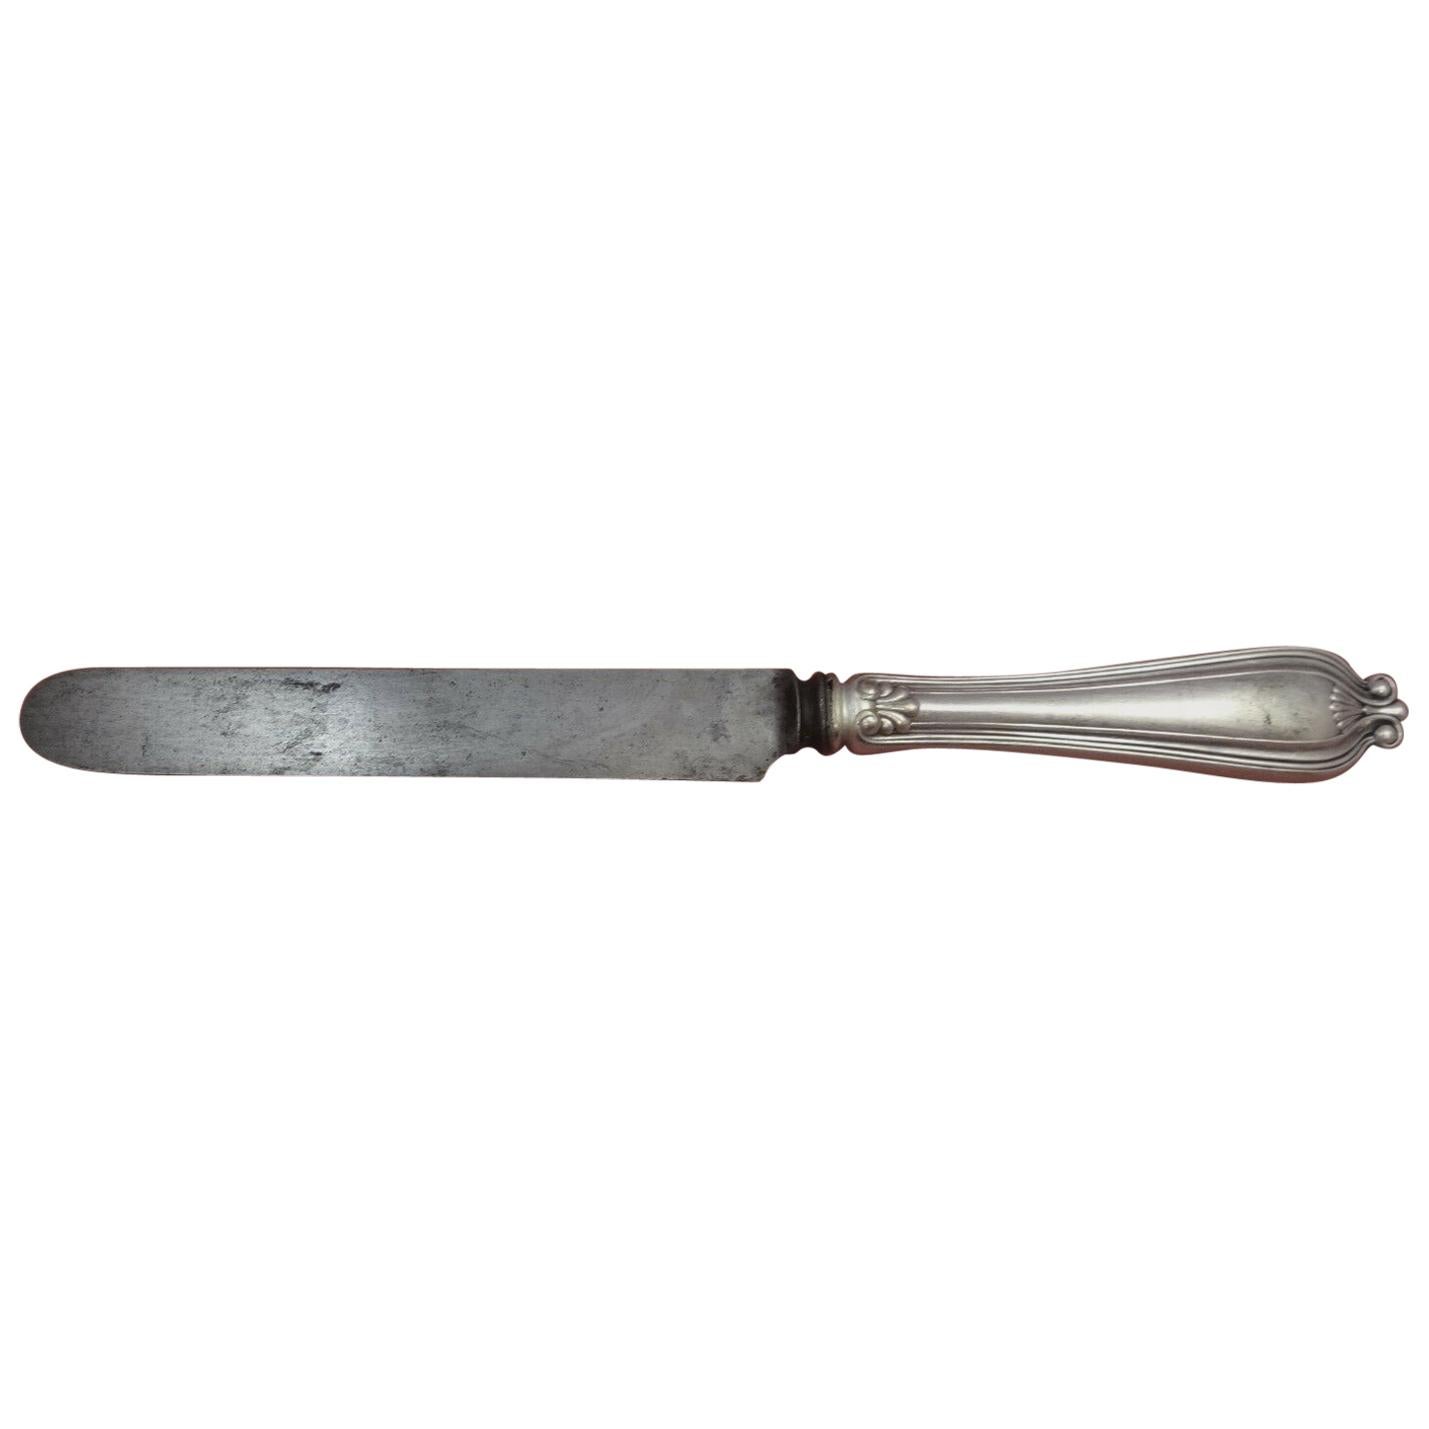 Whittier by Tiffany & Co. Silver Plate Dinner Knife with Carbon Steel Blade